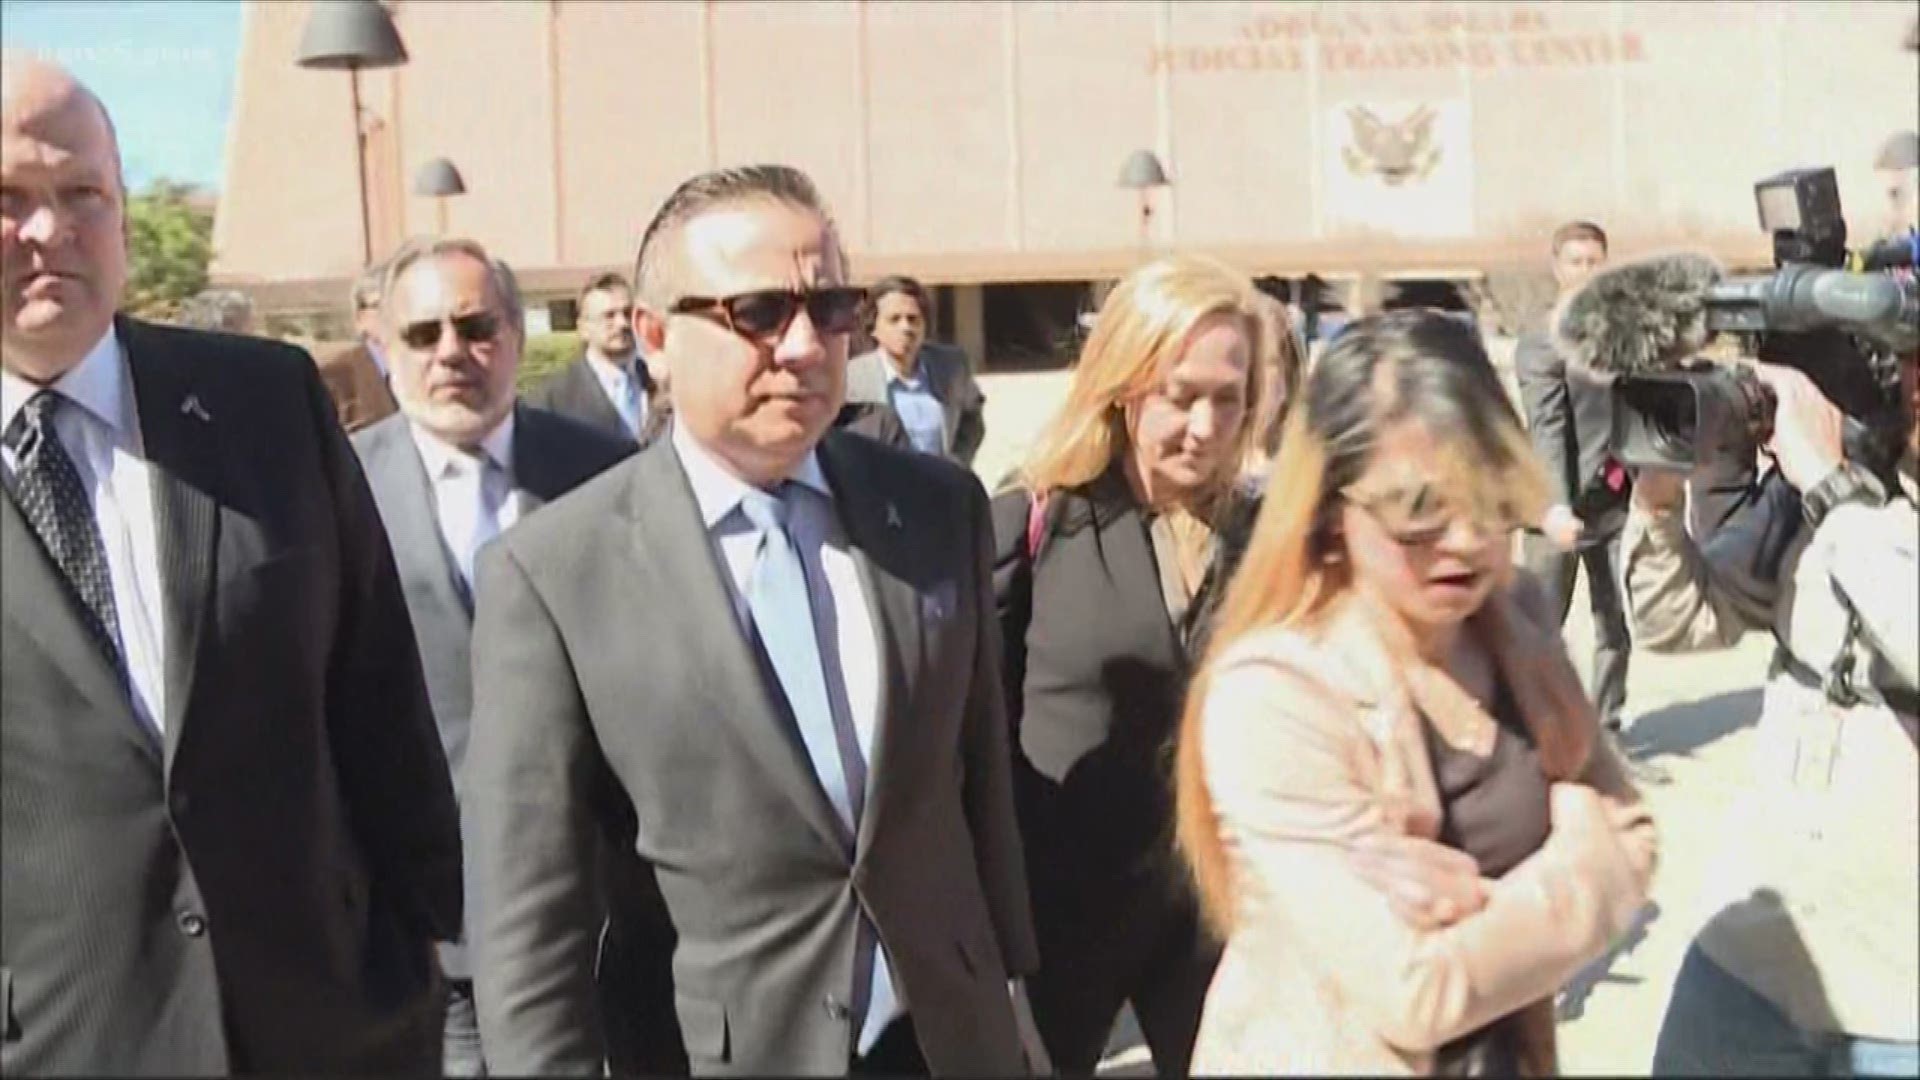 Carlos Uresti was sentenced to five years in prison for conspiracy. He was previously sentenced to a 12-year sentence for his involvement in a Ponzi scheme.